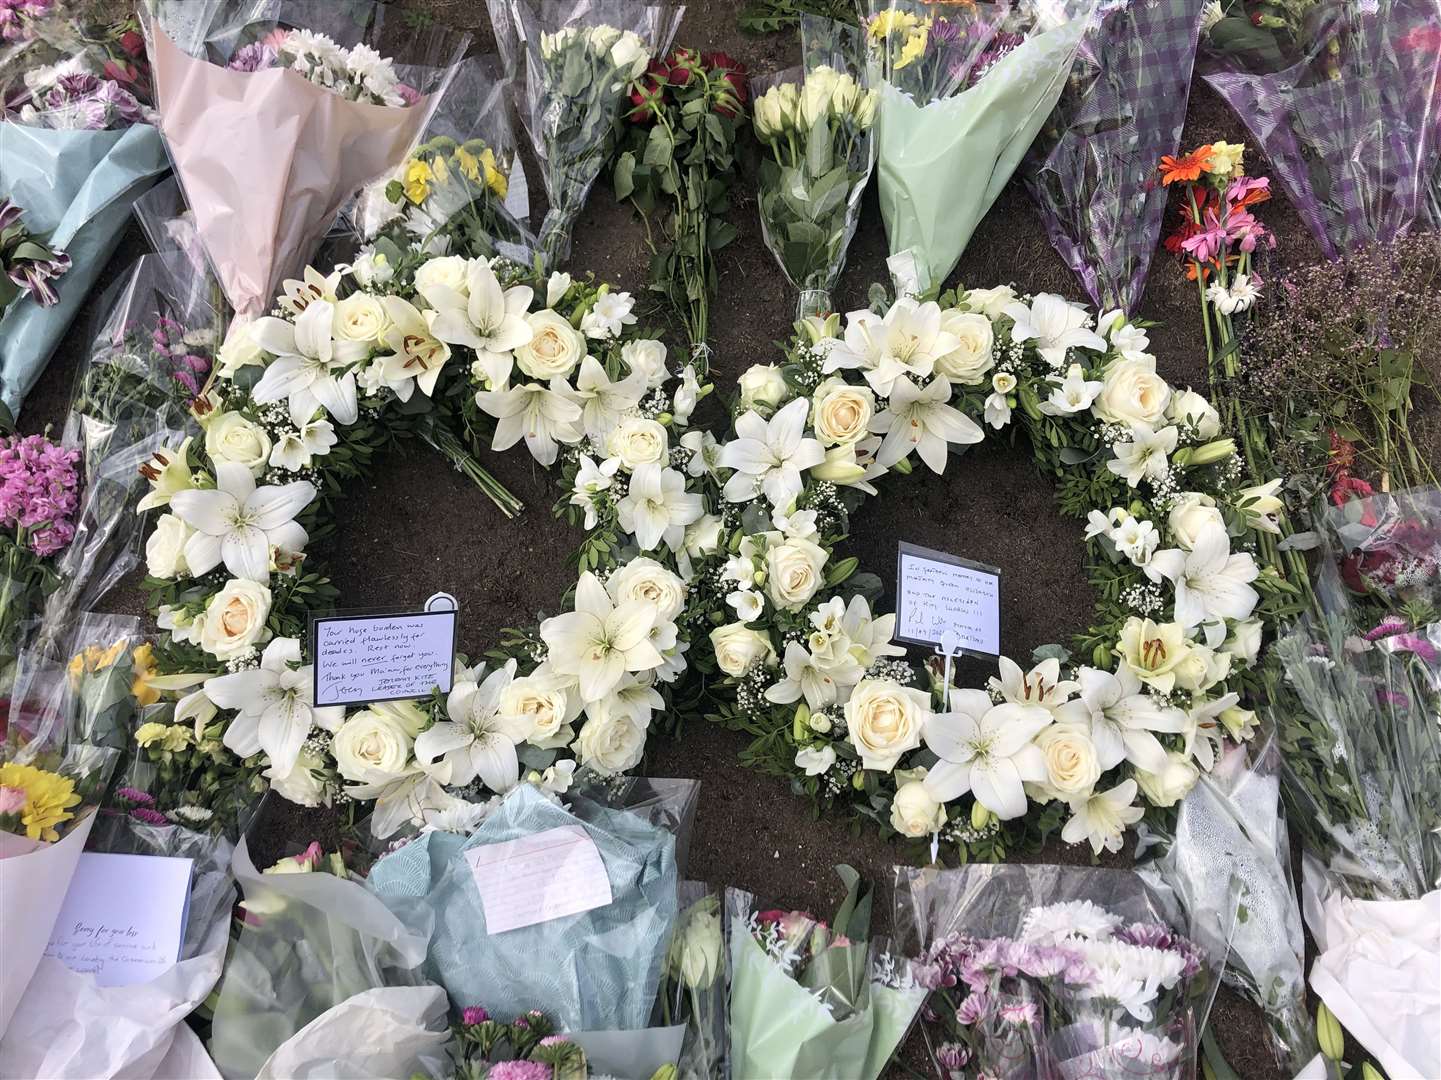 Floral tributes have been left at the war memorial